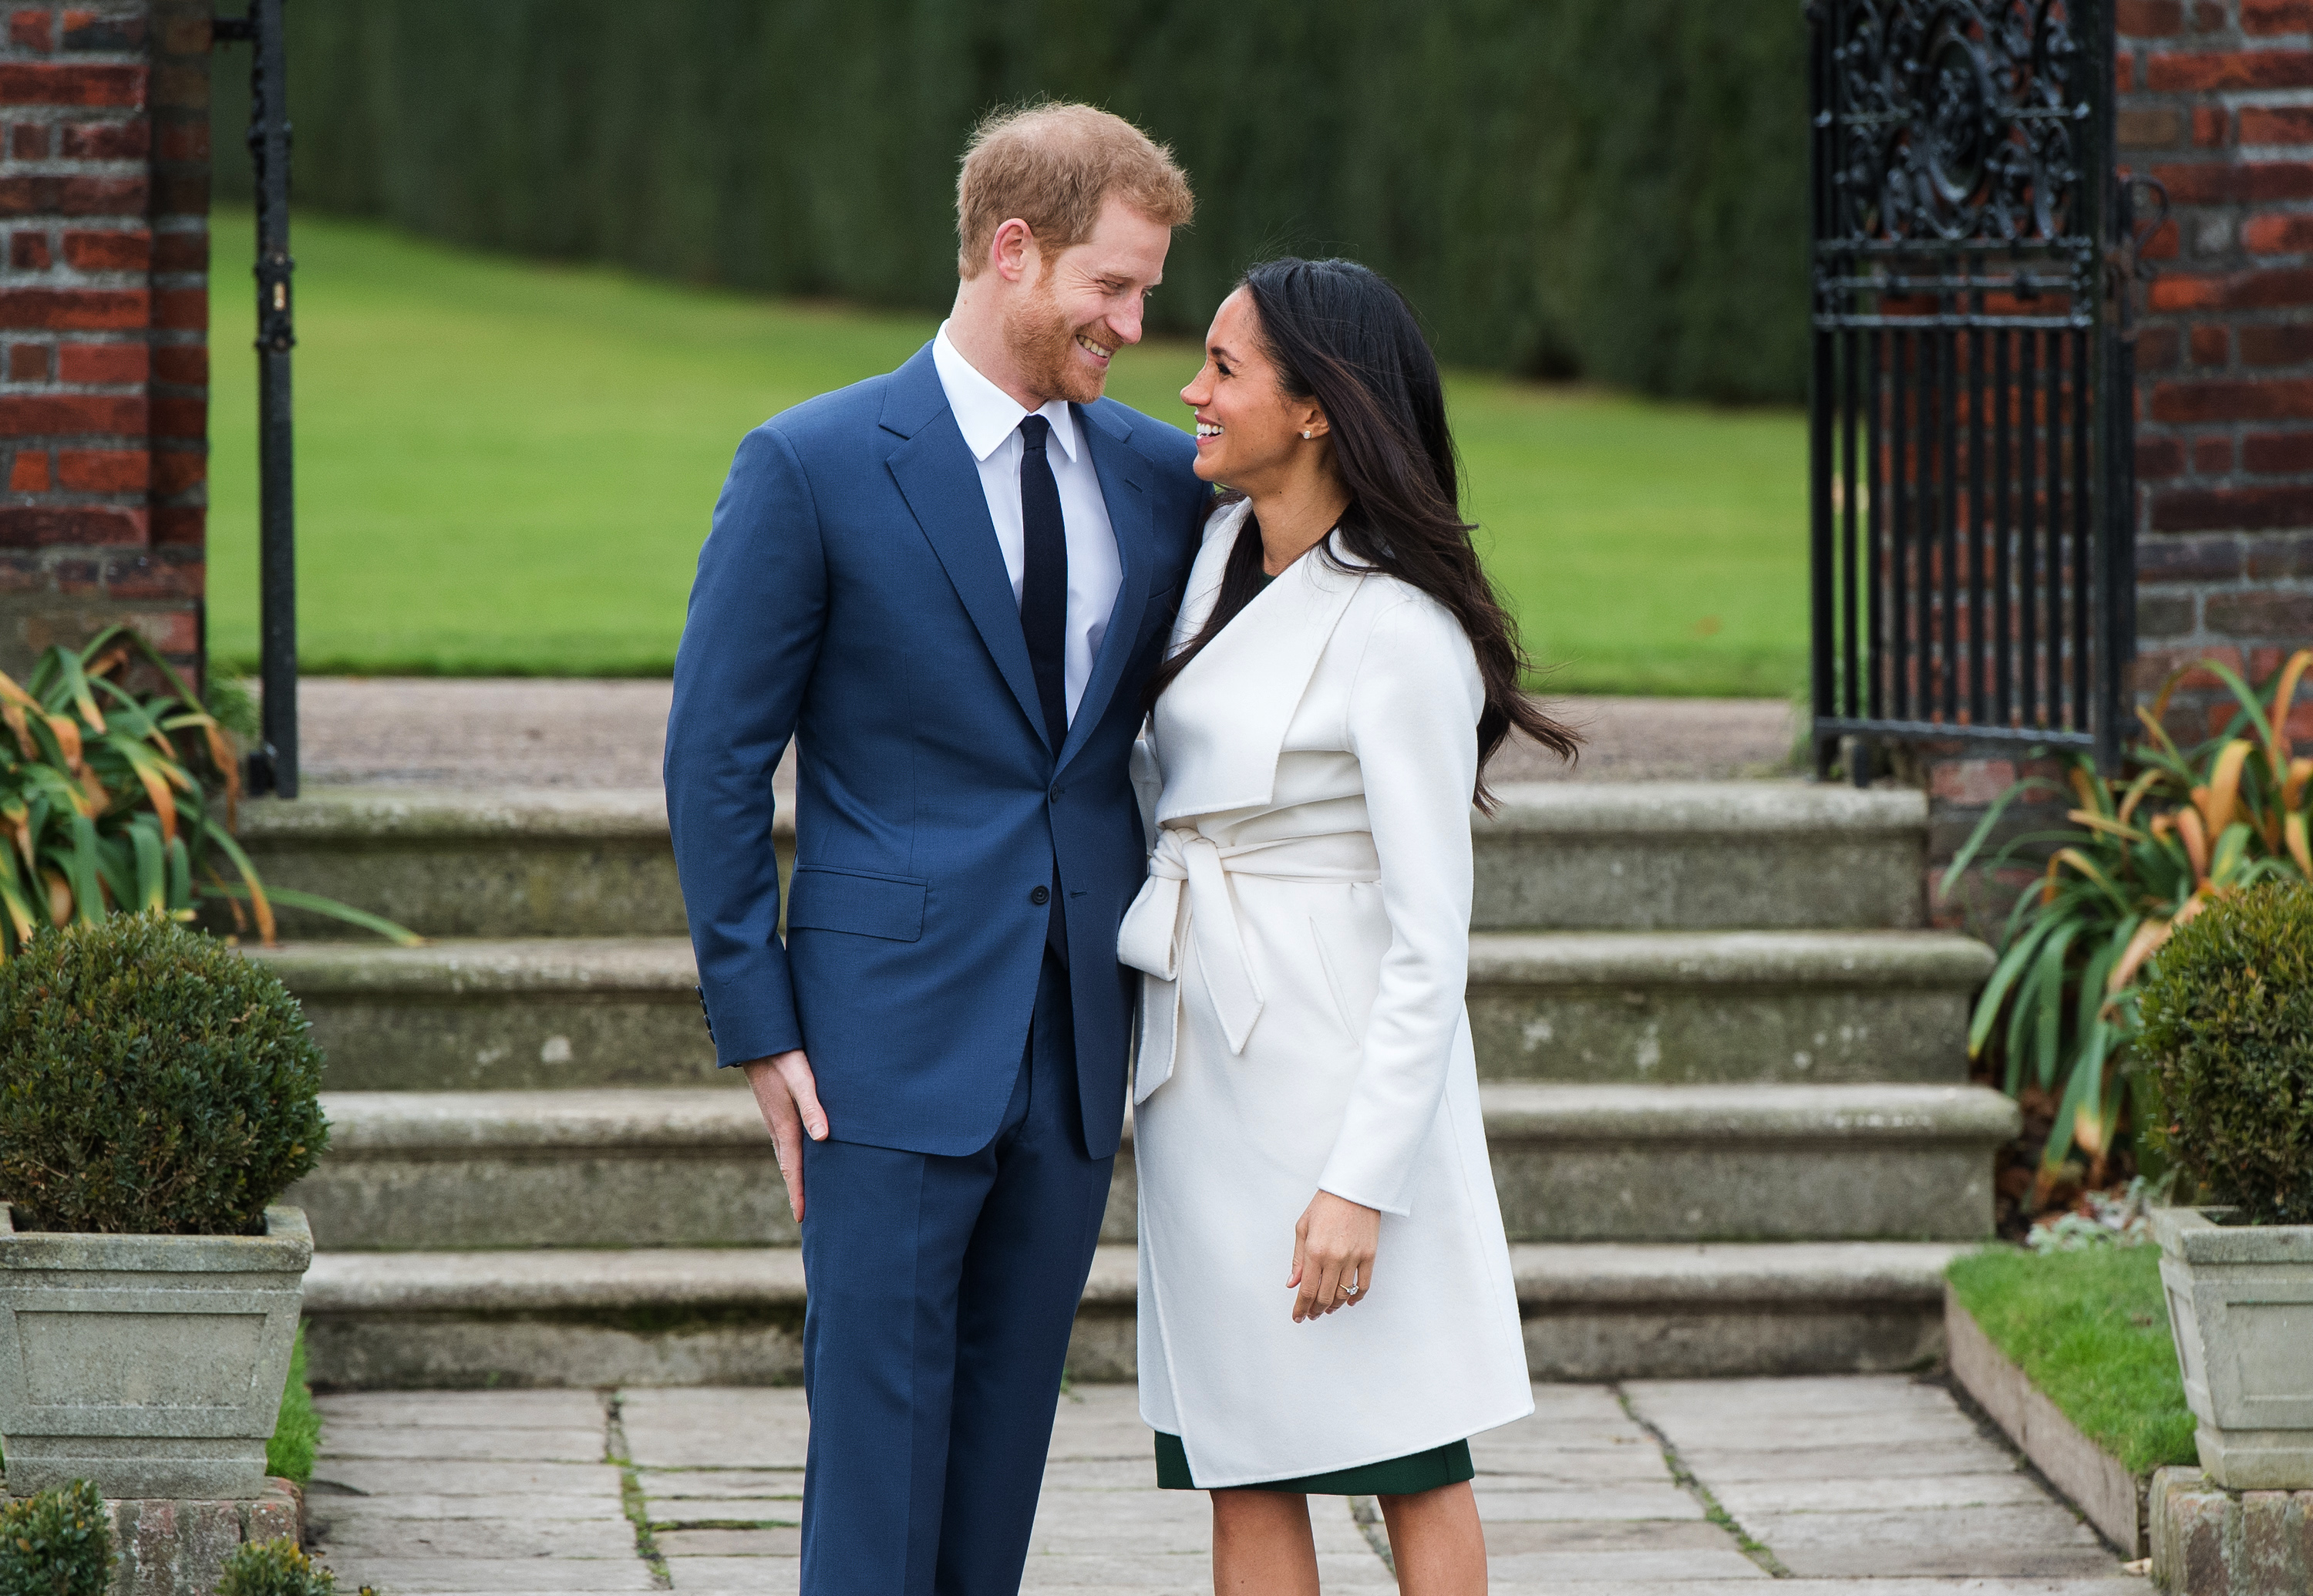 Prince Harry And Meghan Markle: Latest News As New Netflix Episodes Drop